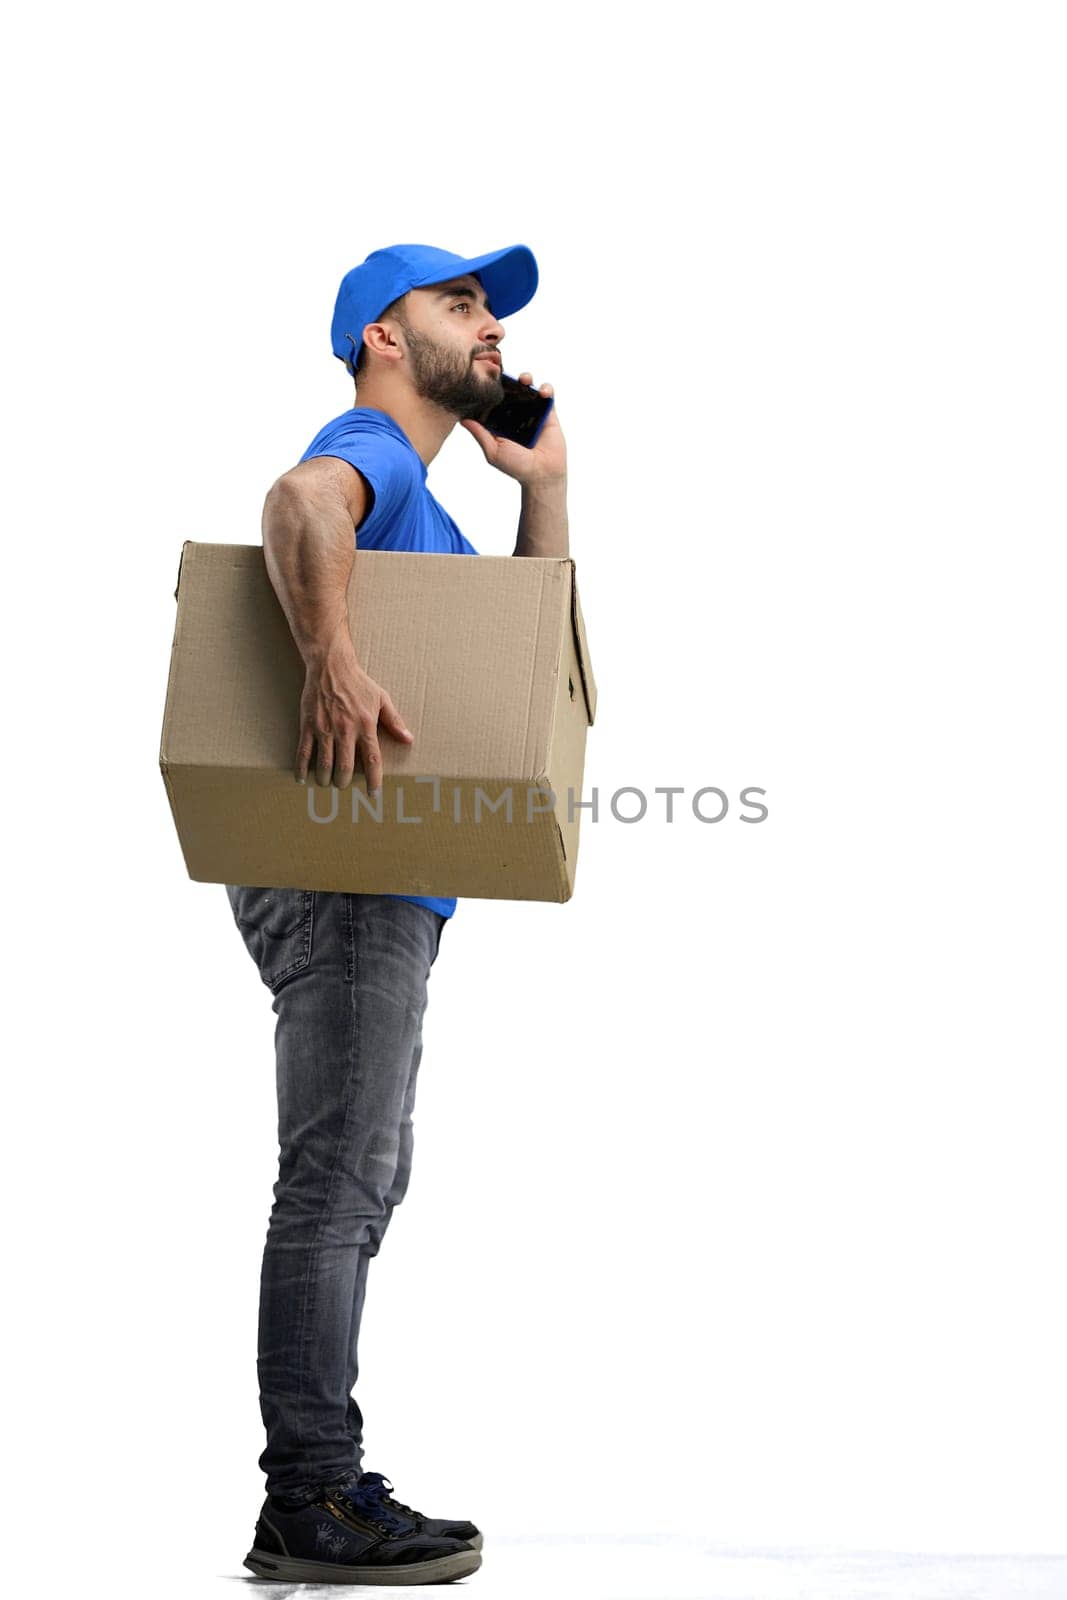 The deliveryman, in full height, on a white background, talking on the phone by Prosto